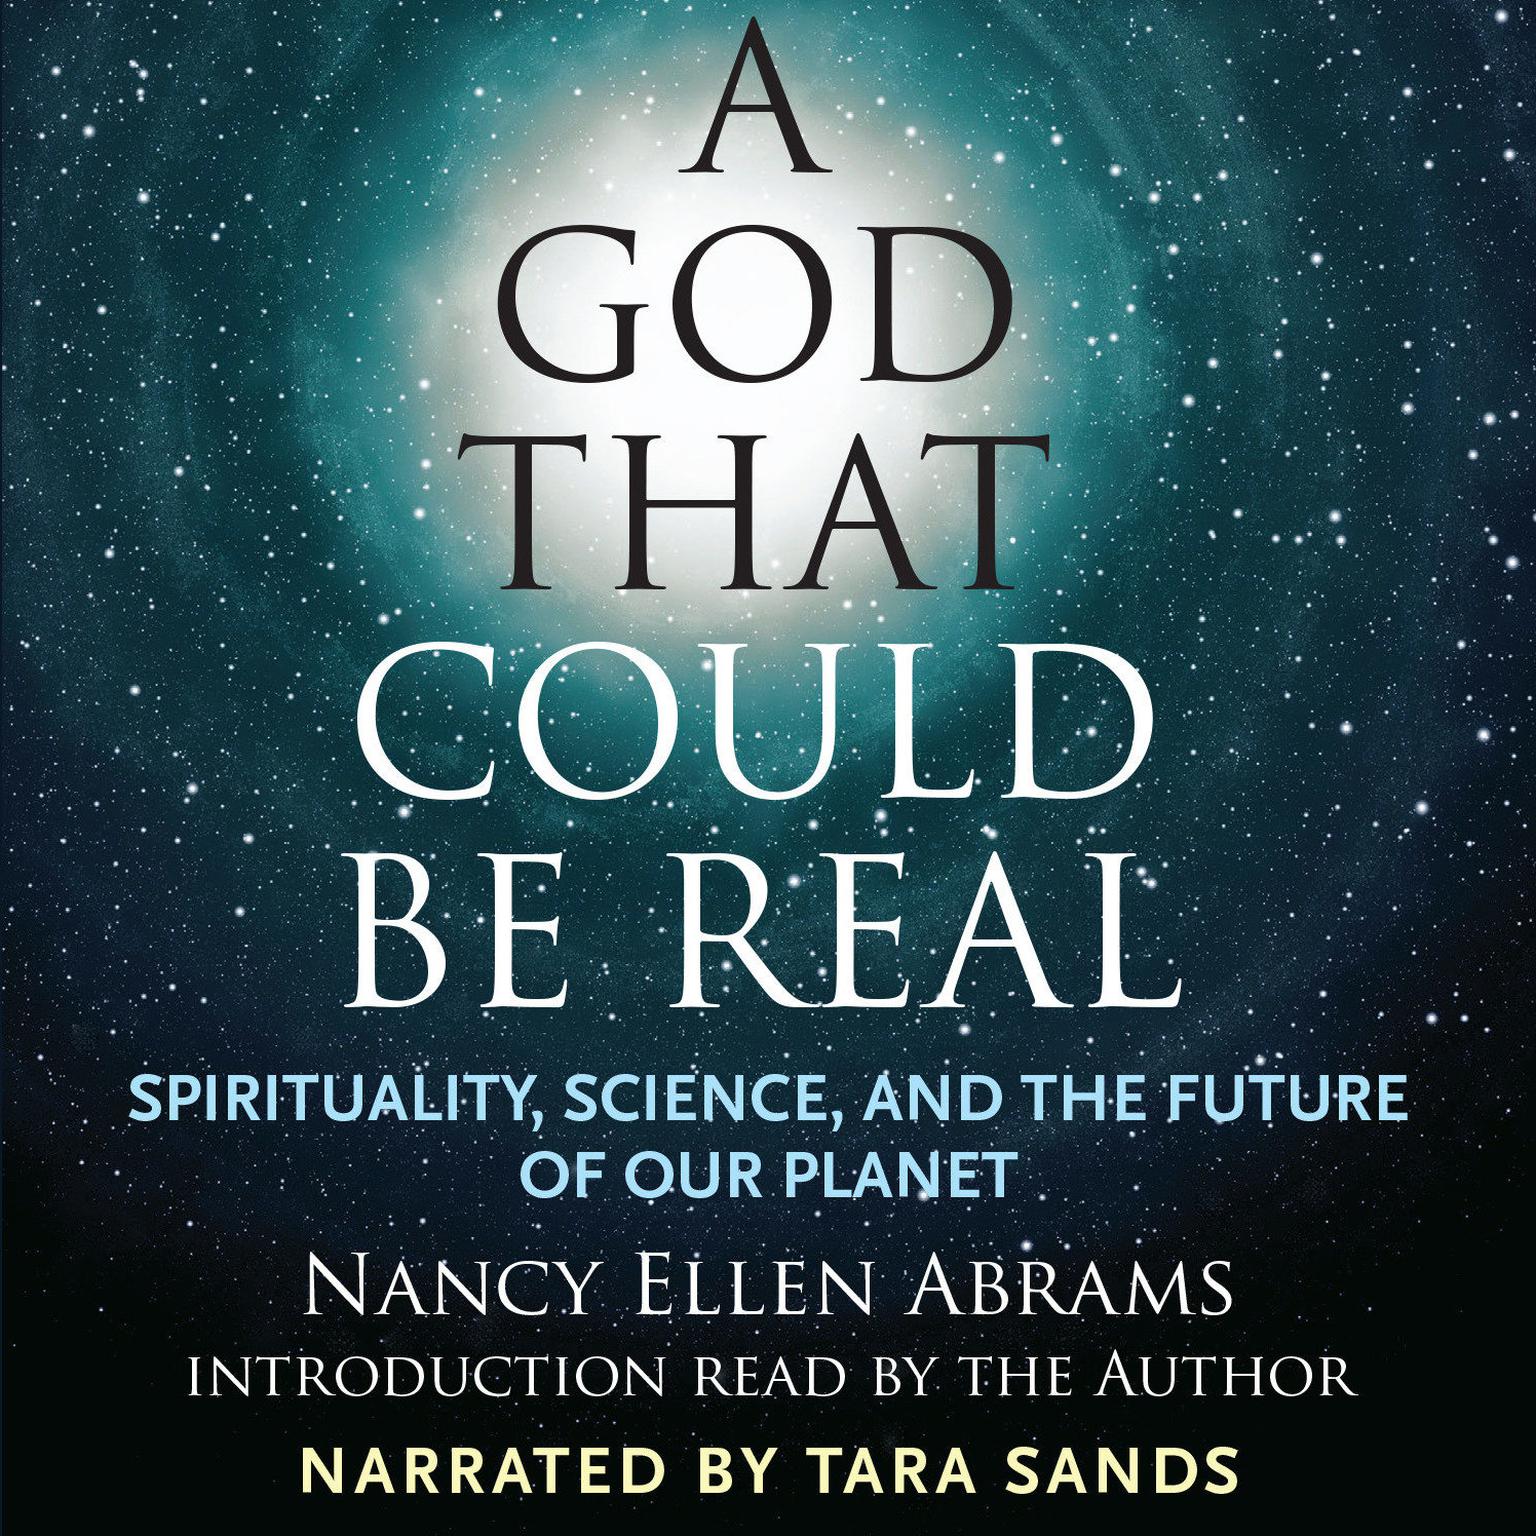 A God That Could Be Real: Spirituality, Science, and the Future of Our Planet Audiobook, by Nancy Ellen Abrams